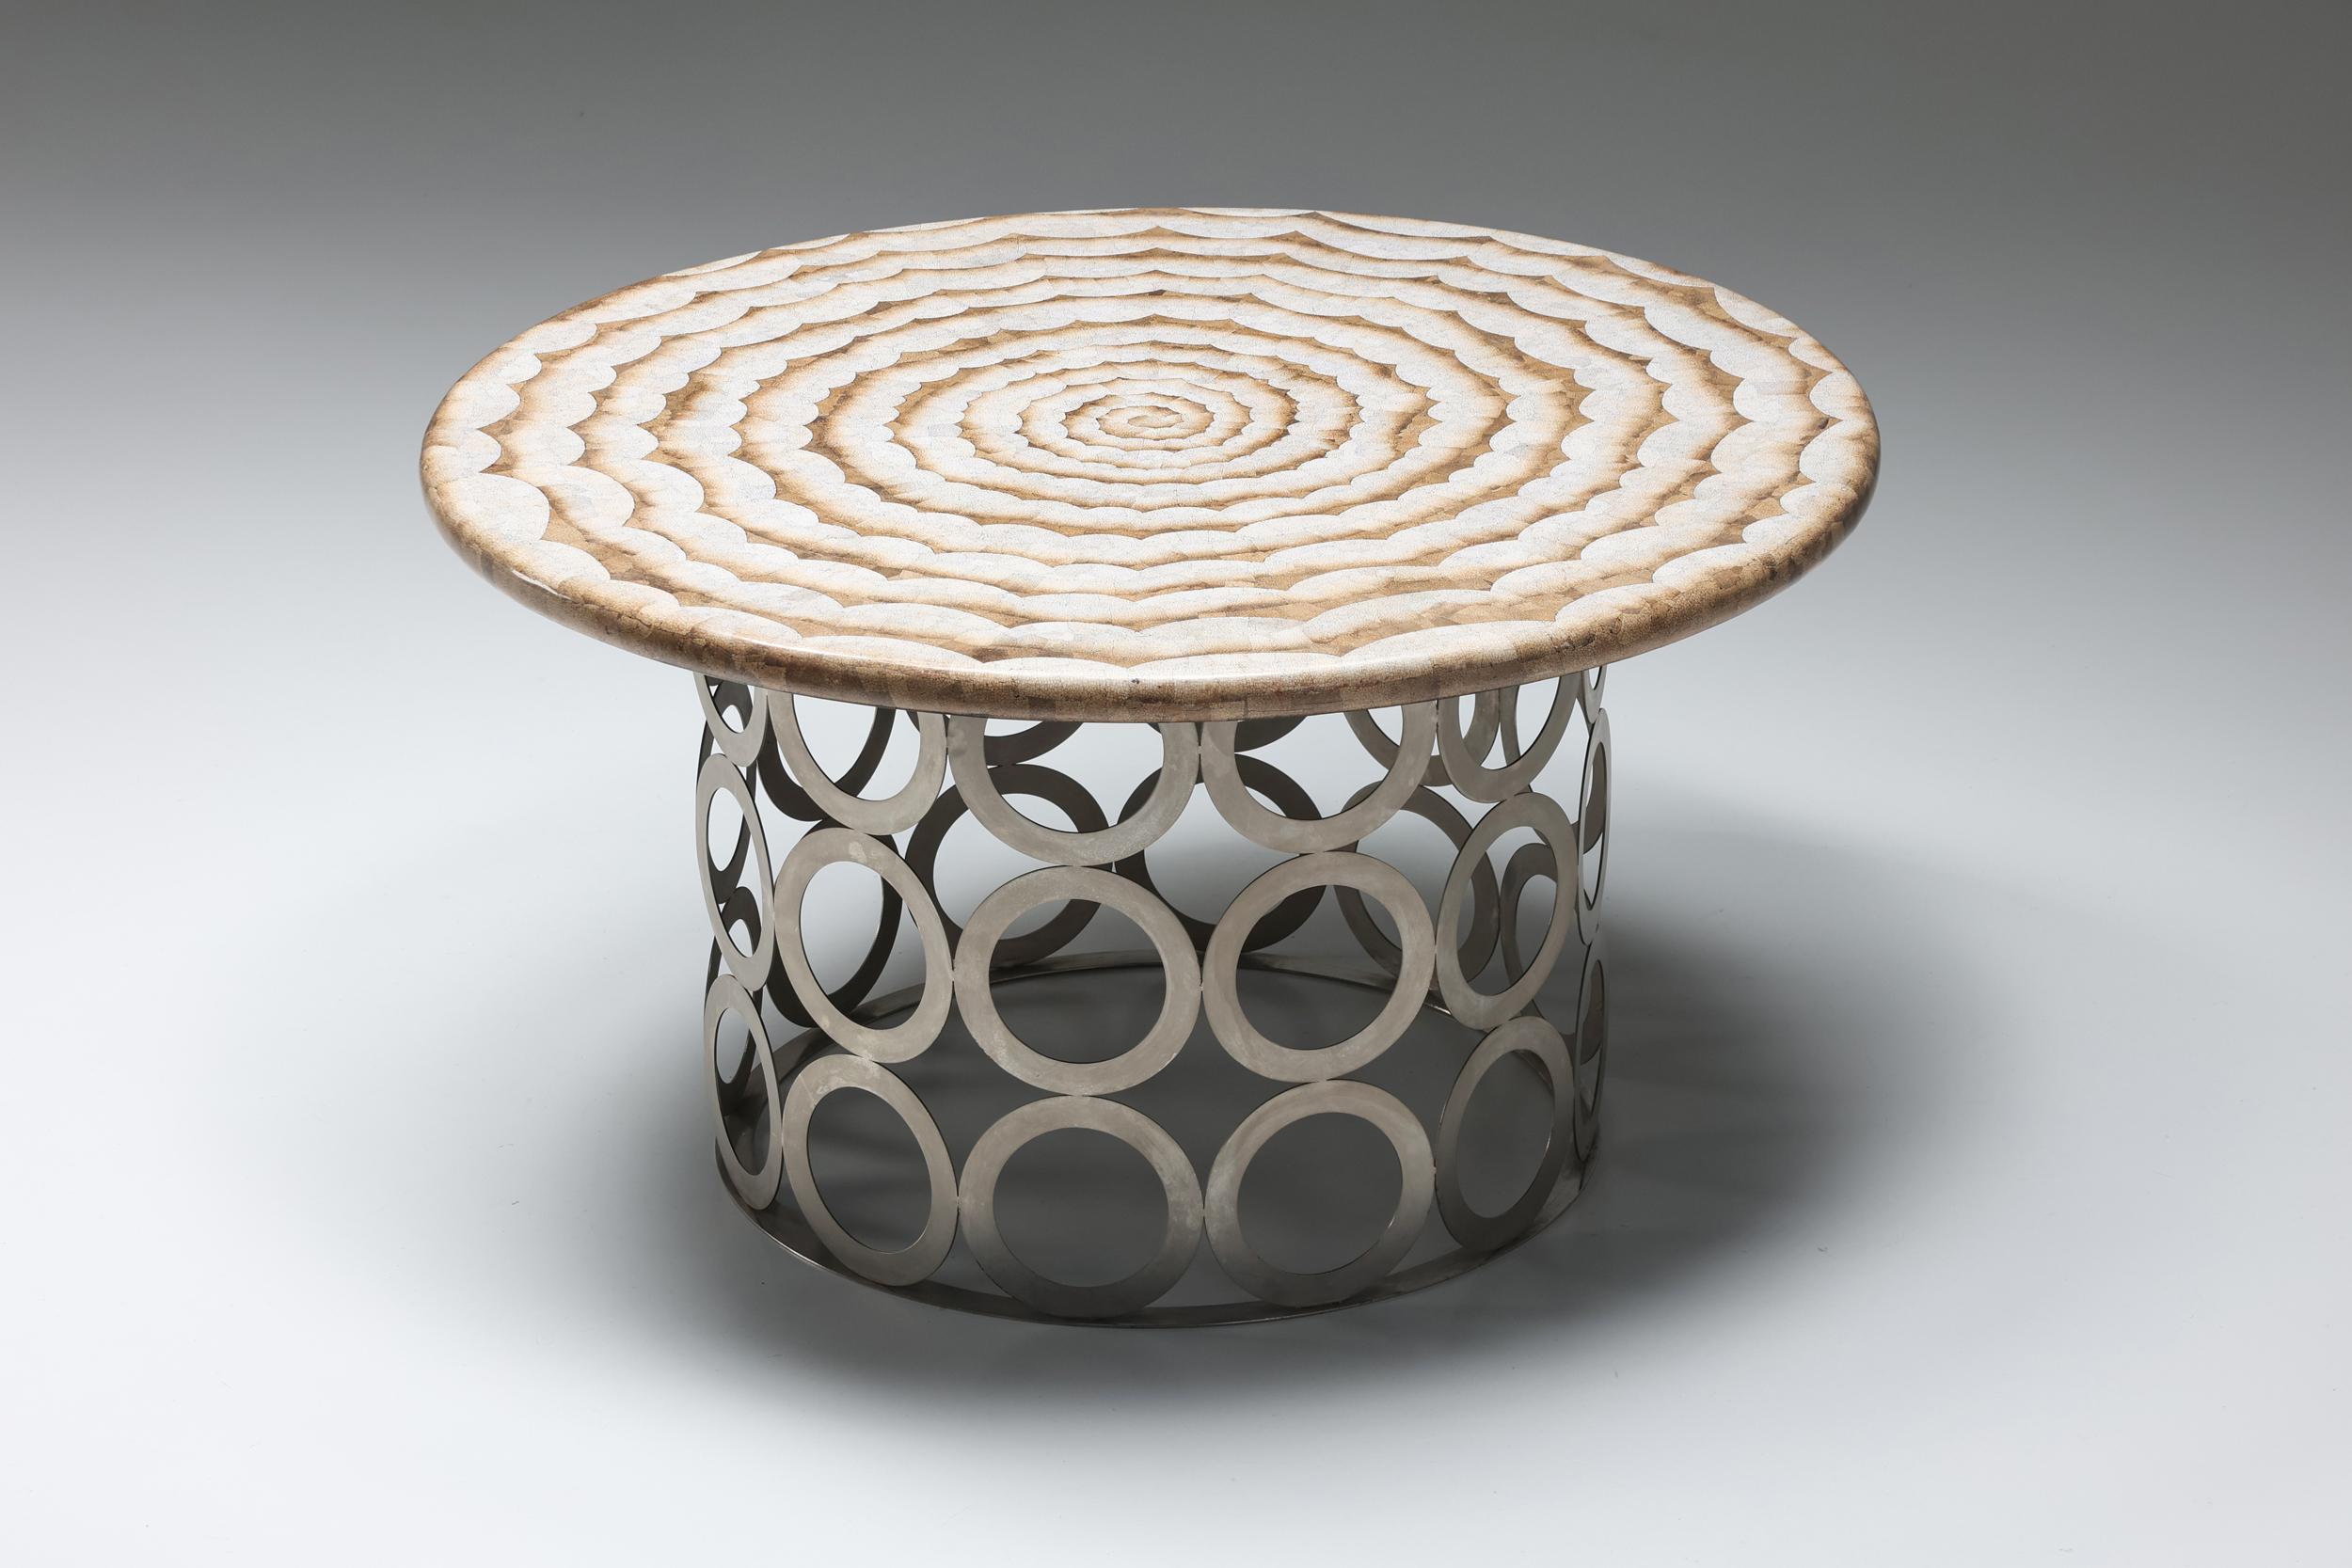 Anacleto Spazzapan; Italy; 21st century; Modern; Post-Modern; 2000's; Italian Design; Eclectic; Hollywood Regency; Luxury; 

Eclectic Anacleto Spazzapan round dining table. Graphic white and beige tabletop with metal base. A chique piece that